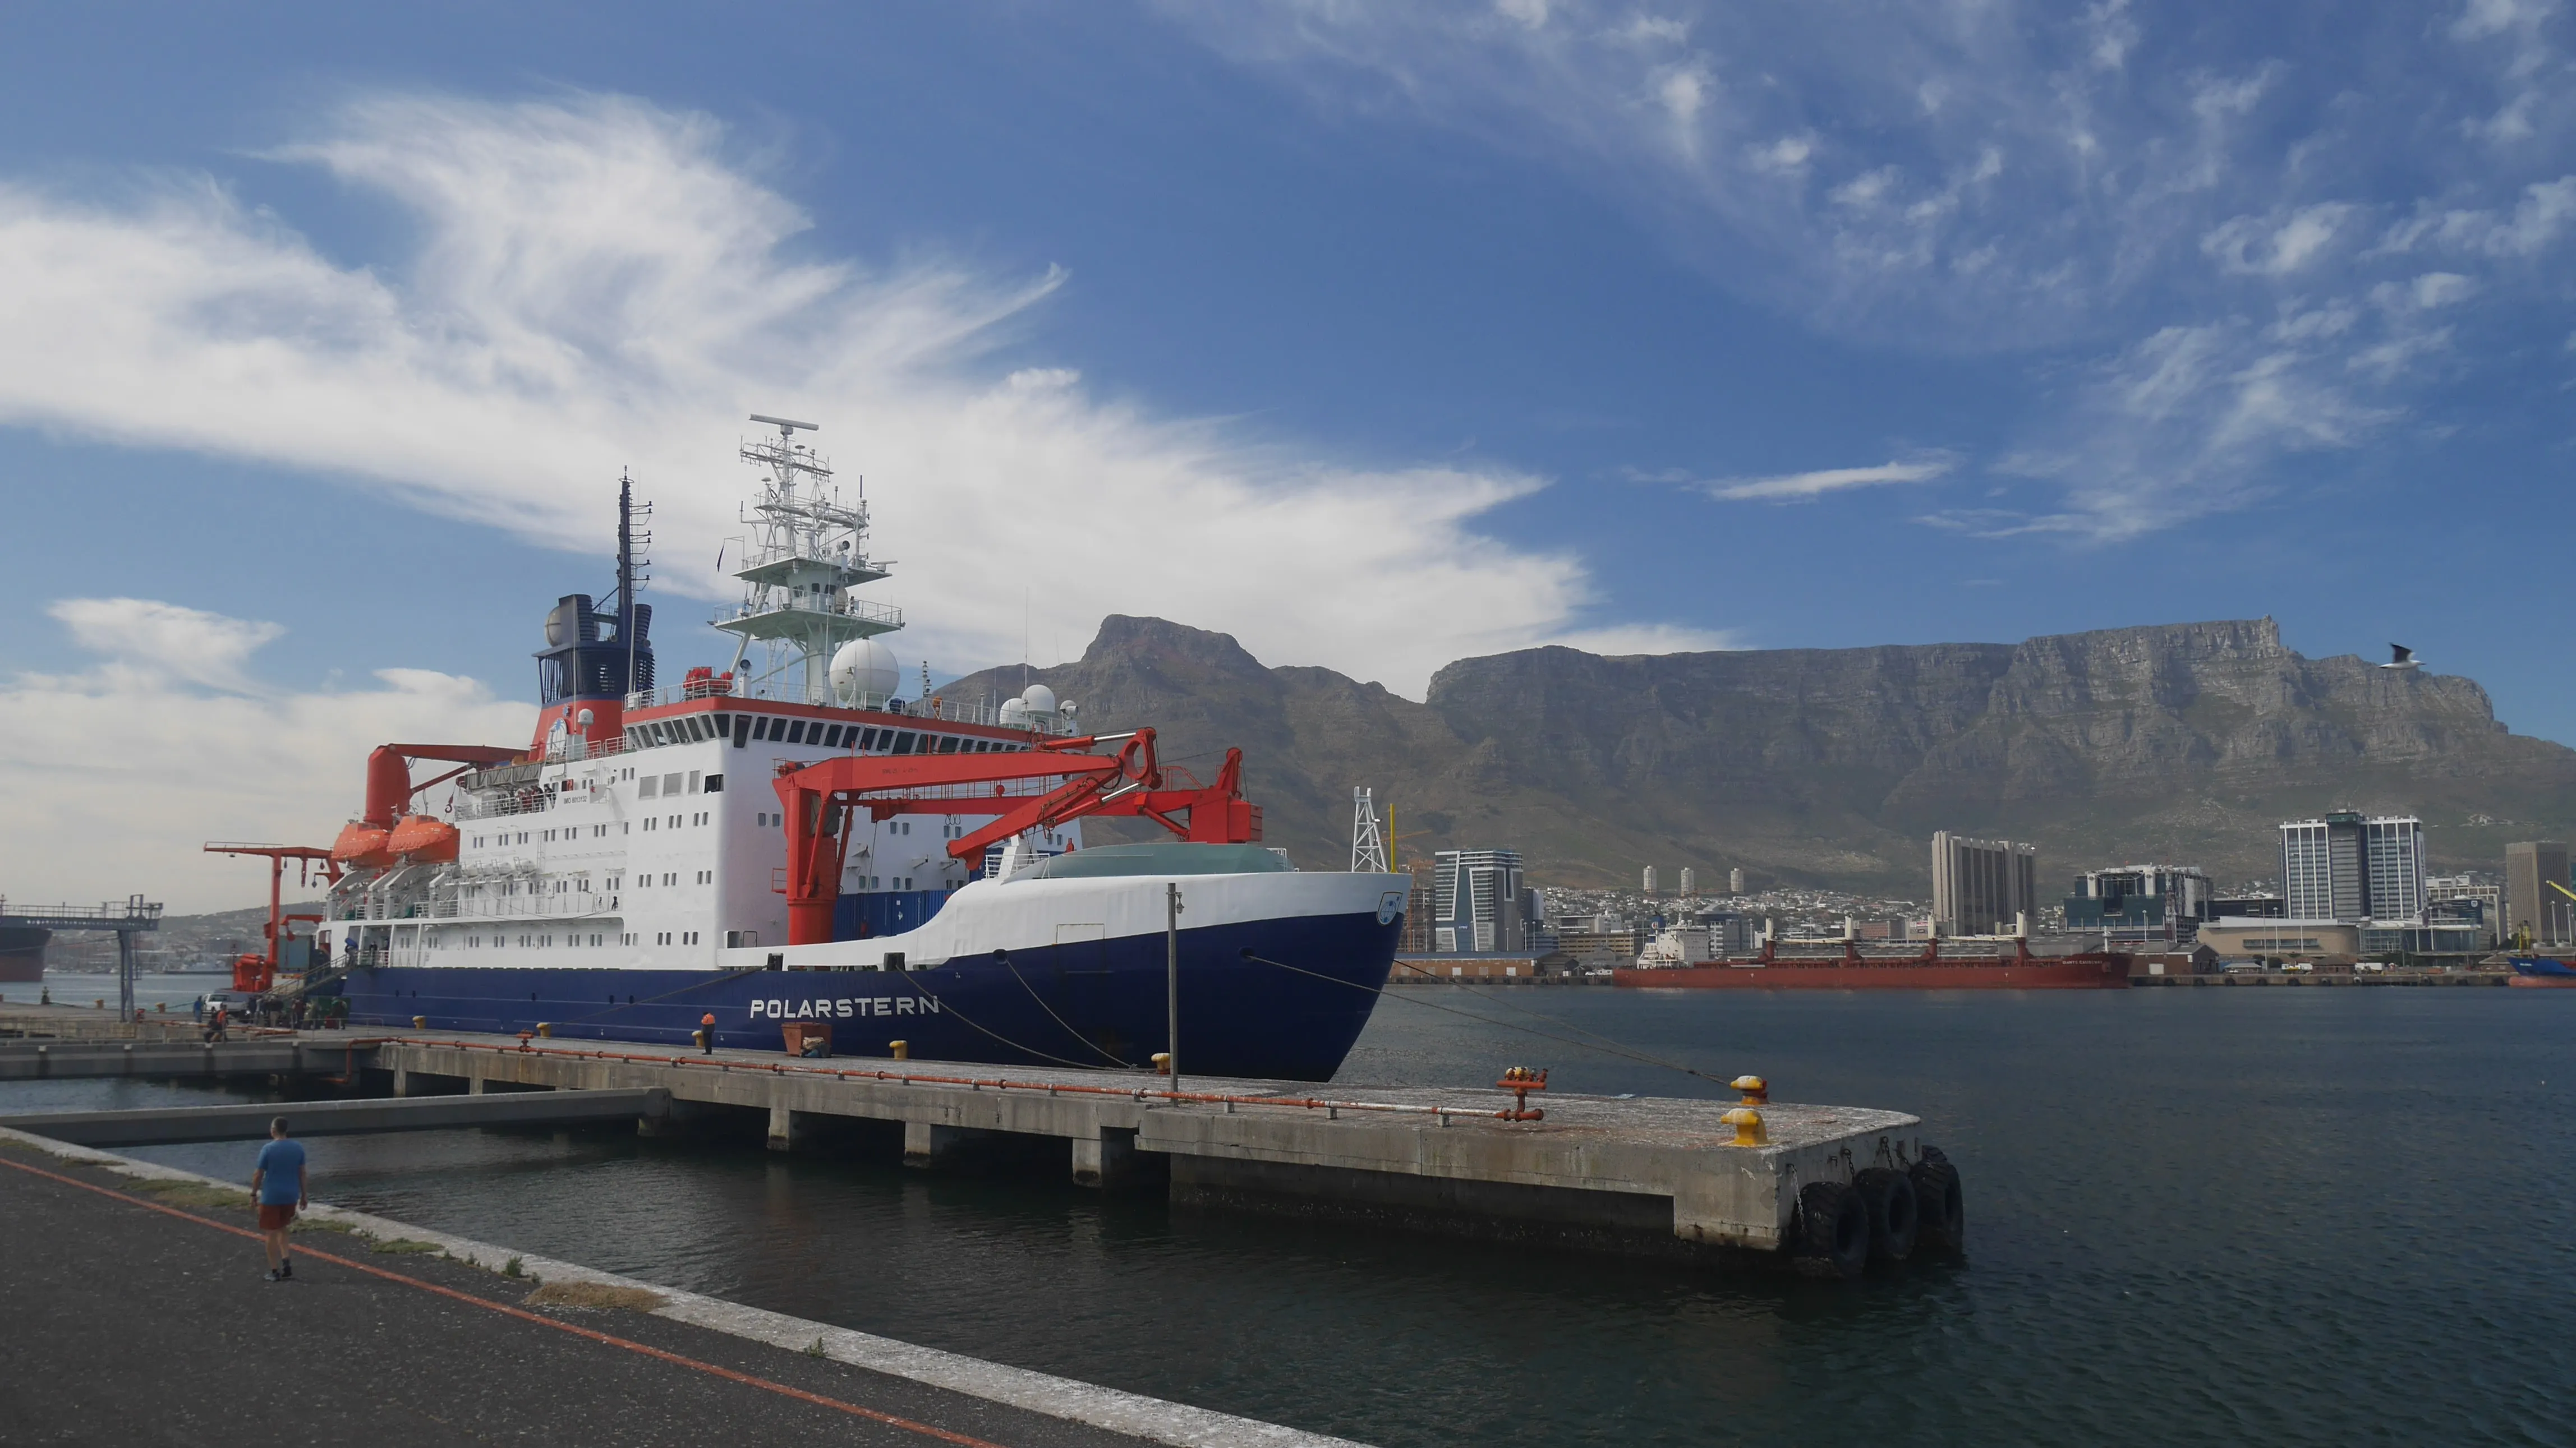 A blue and white ship in a harbour with a city in the middle ground and a mountain in the background